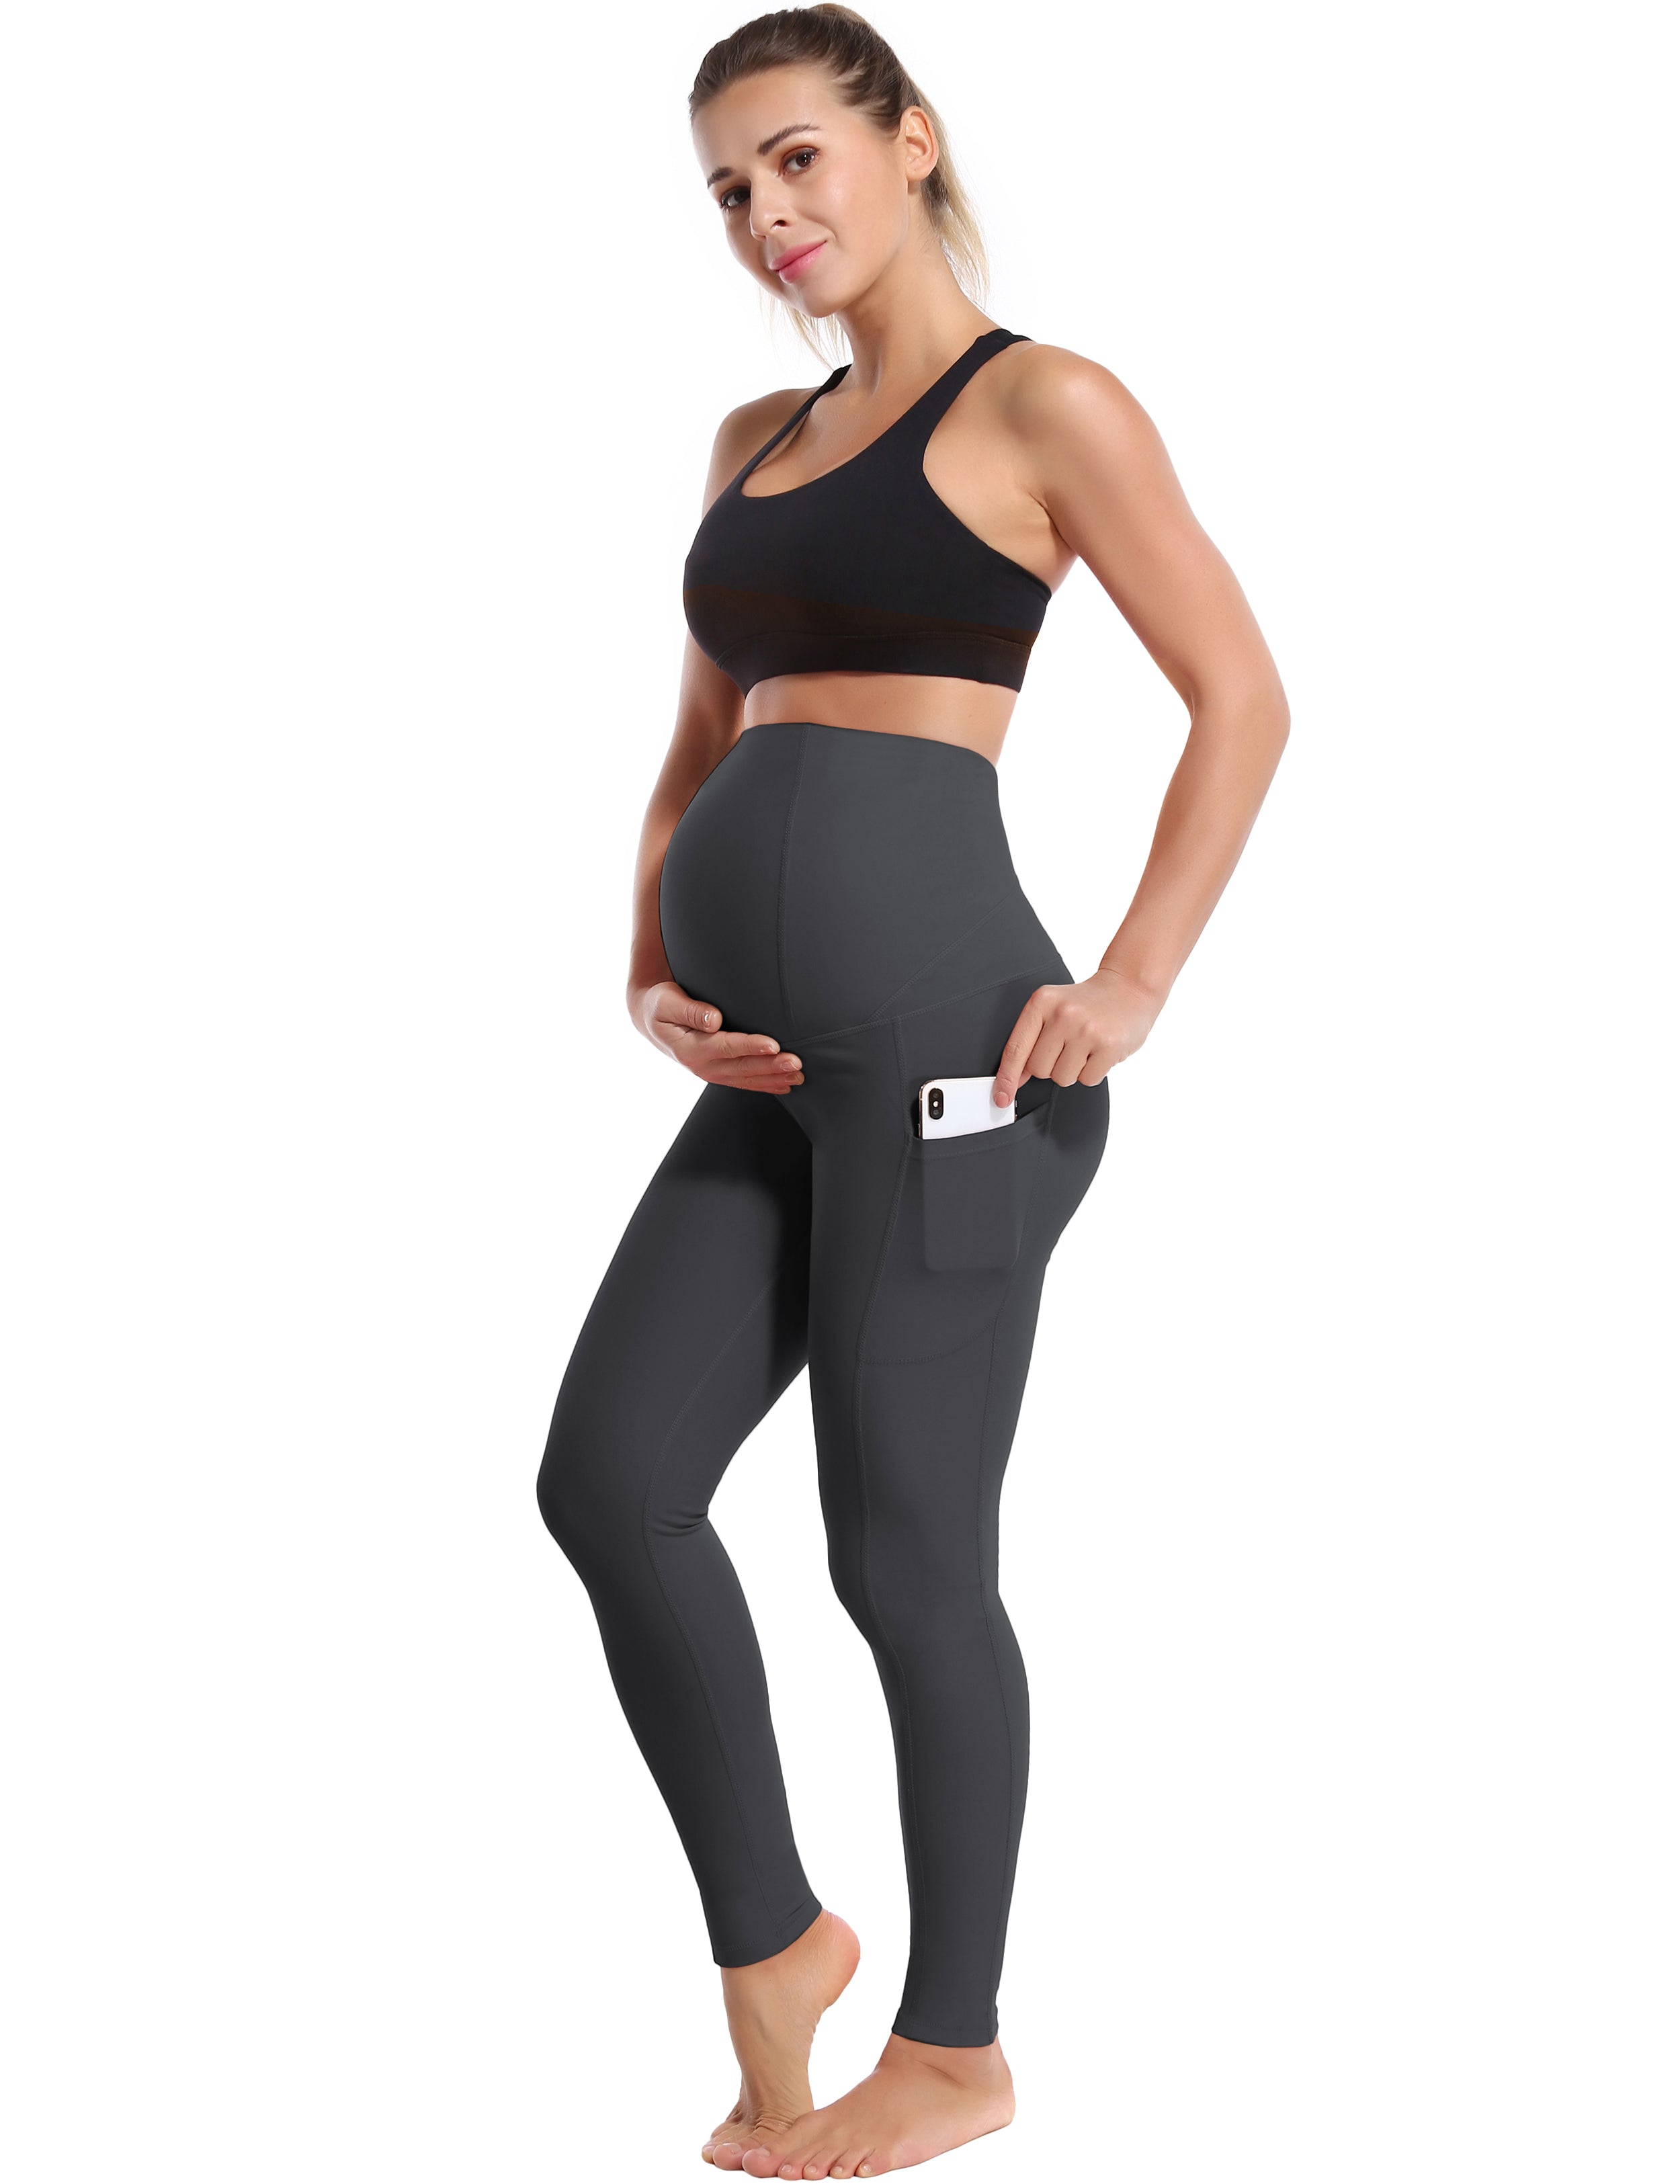 26" Side Pockets Maternity Biking Pants shadowcharcoal 87%Nylon/13%Spandex Softest-ever fabric High elasticity 4-way stretch Fabric doesn't attract lint easily No see-through Moisture-wicking Machine wash